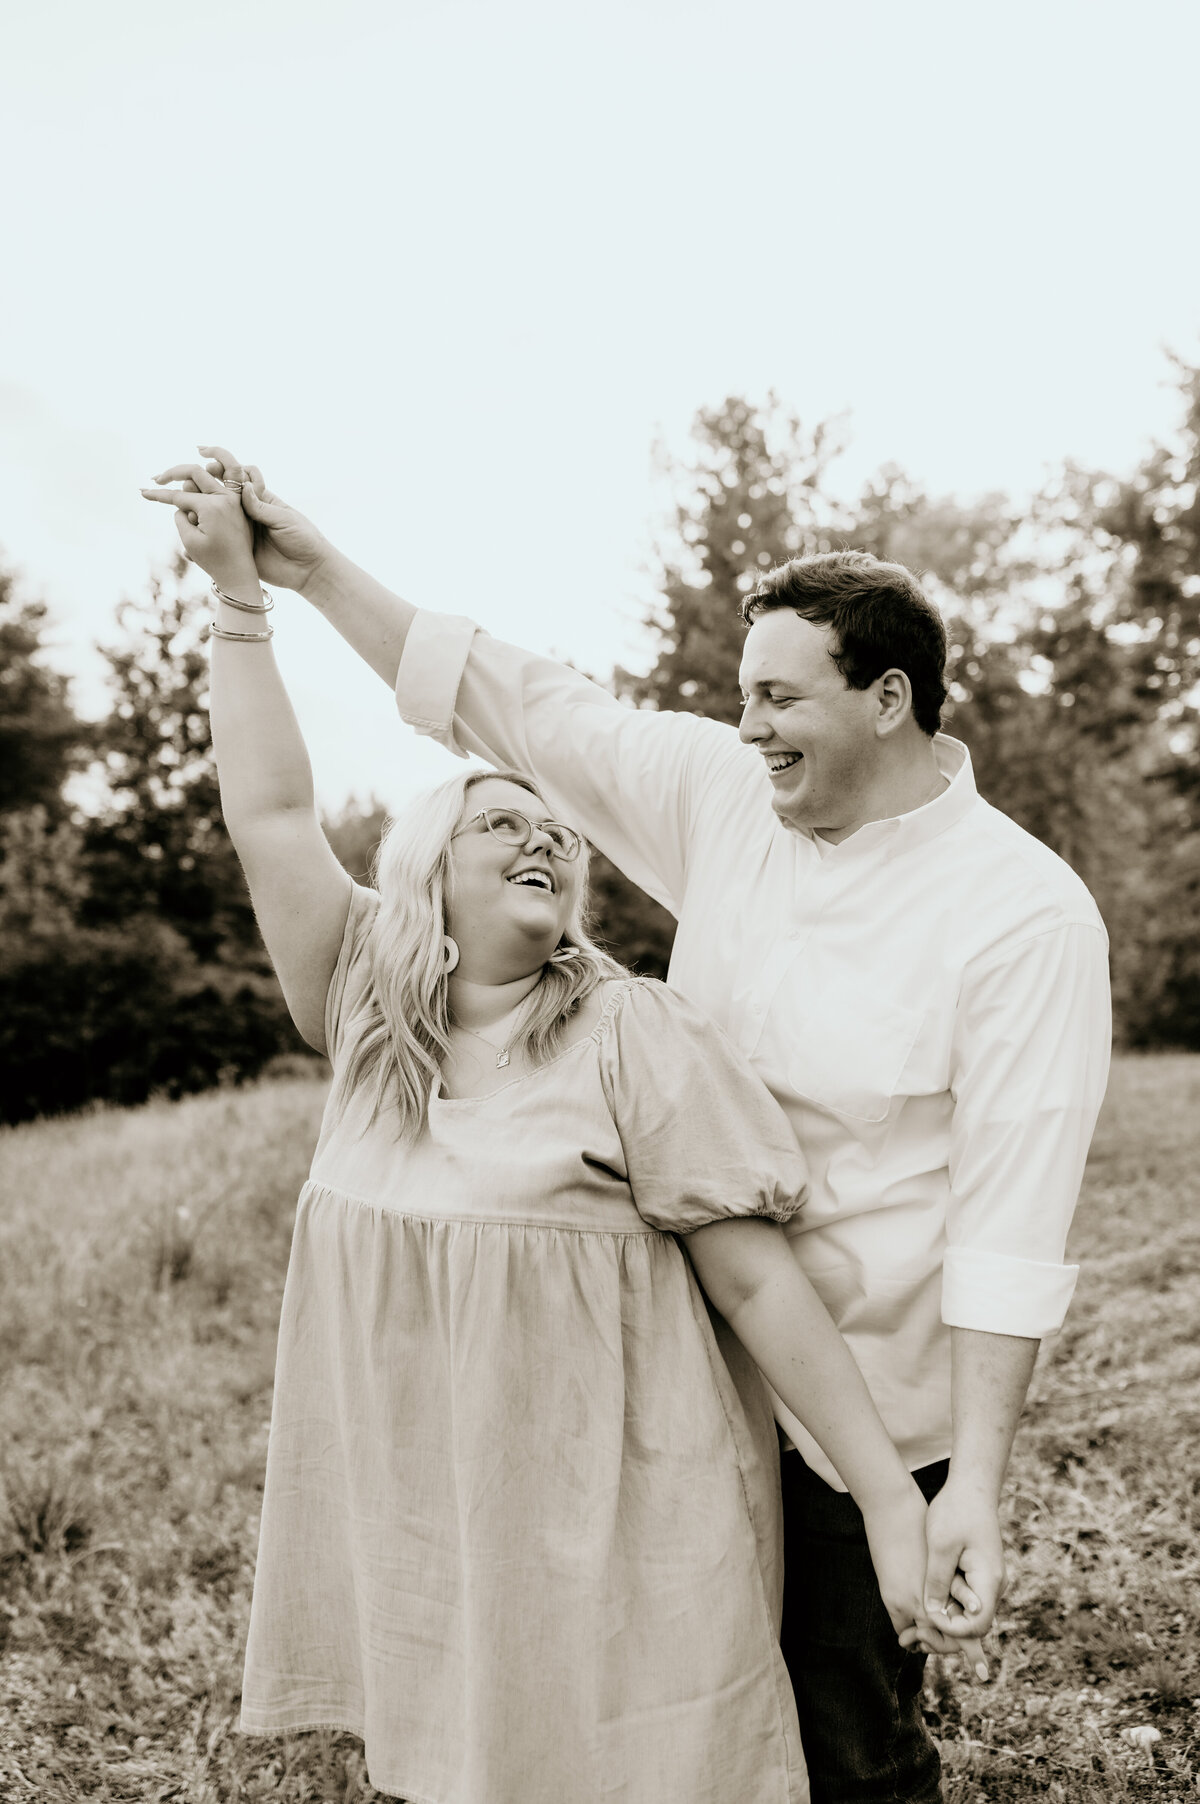 black and white engagement photography with man and woman dancing in a field together as the woman looks back at the man as they smile captured by little rock ar engagement photographer